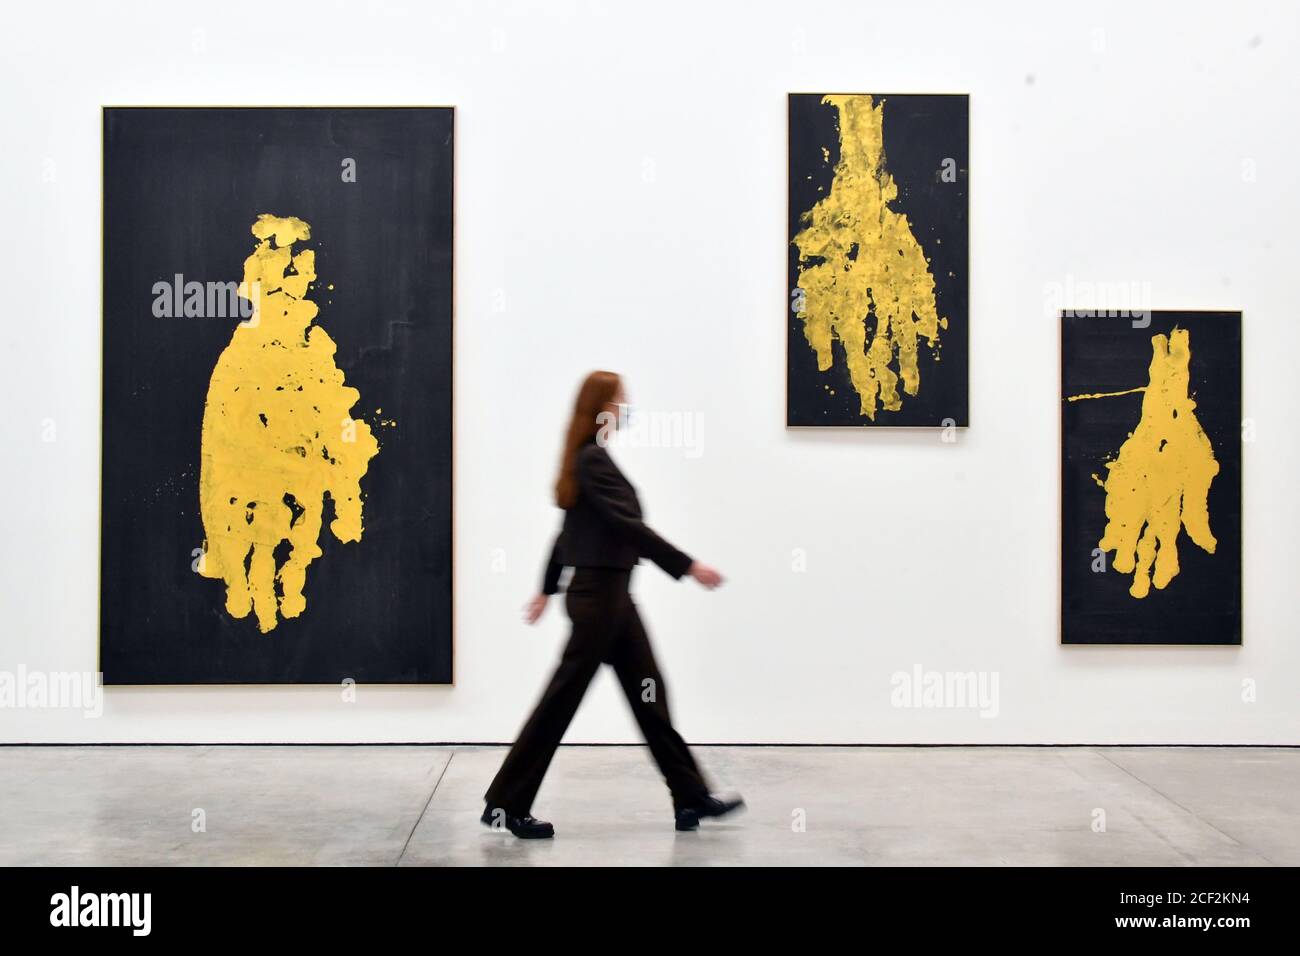 London, UK - 3 September 2020 Preview of ÔDarkness GoldnessÕ, a solo exhibition by Georg Baselitz at White Cube Mason's Yard consisting of new paintings featuring mysterious, ghostly hands rendered in gold, alongside related drawings and fire-gilded bronze reliefs, the artistÕs first sculptural works in almost a decade. (L-R) Manodopera C ArbeitskrŠfte, 2019, Per mano C an der Hand, 2019, Mano sola, 2019  Credit: Nils Jorgensen/Alamy Live News Stock Photo